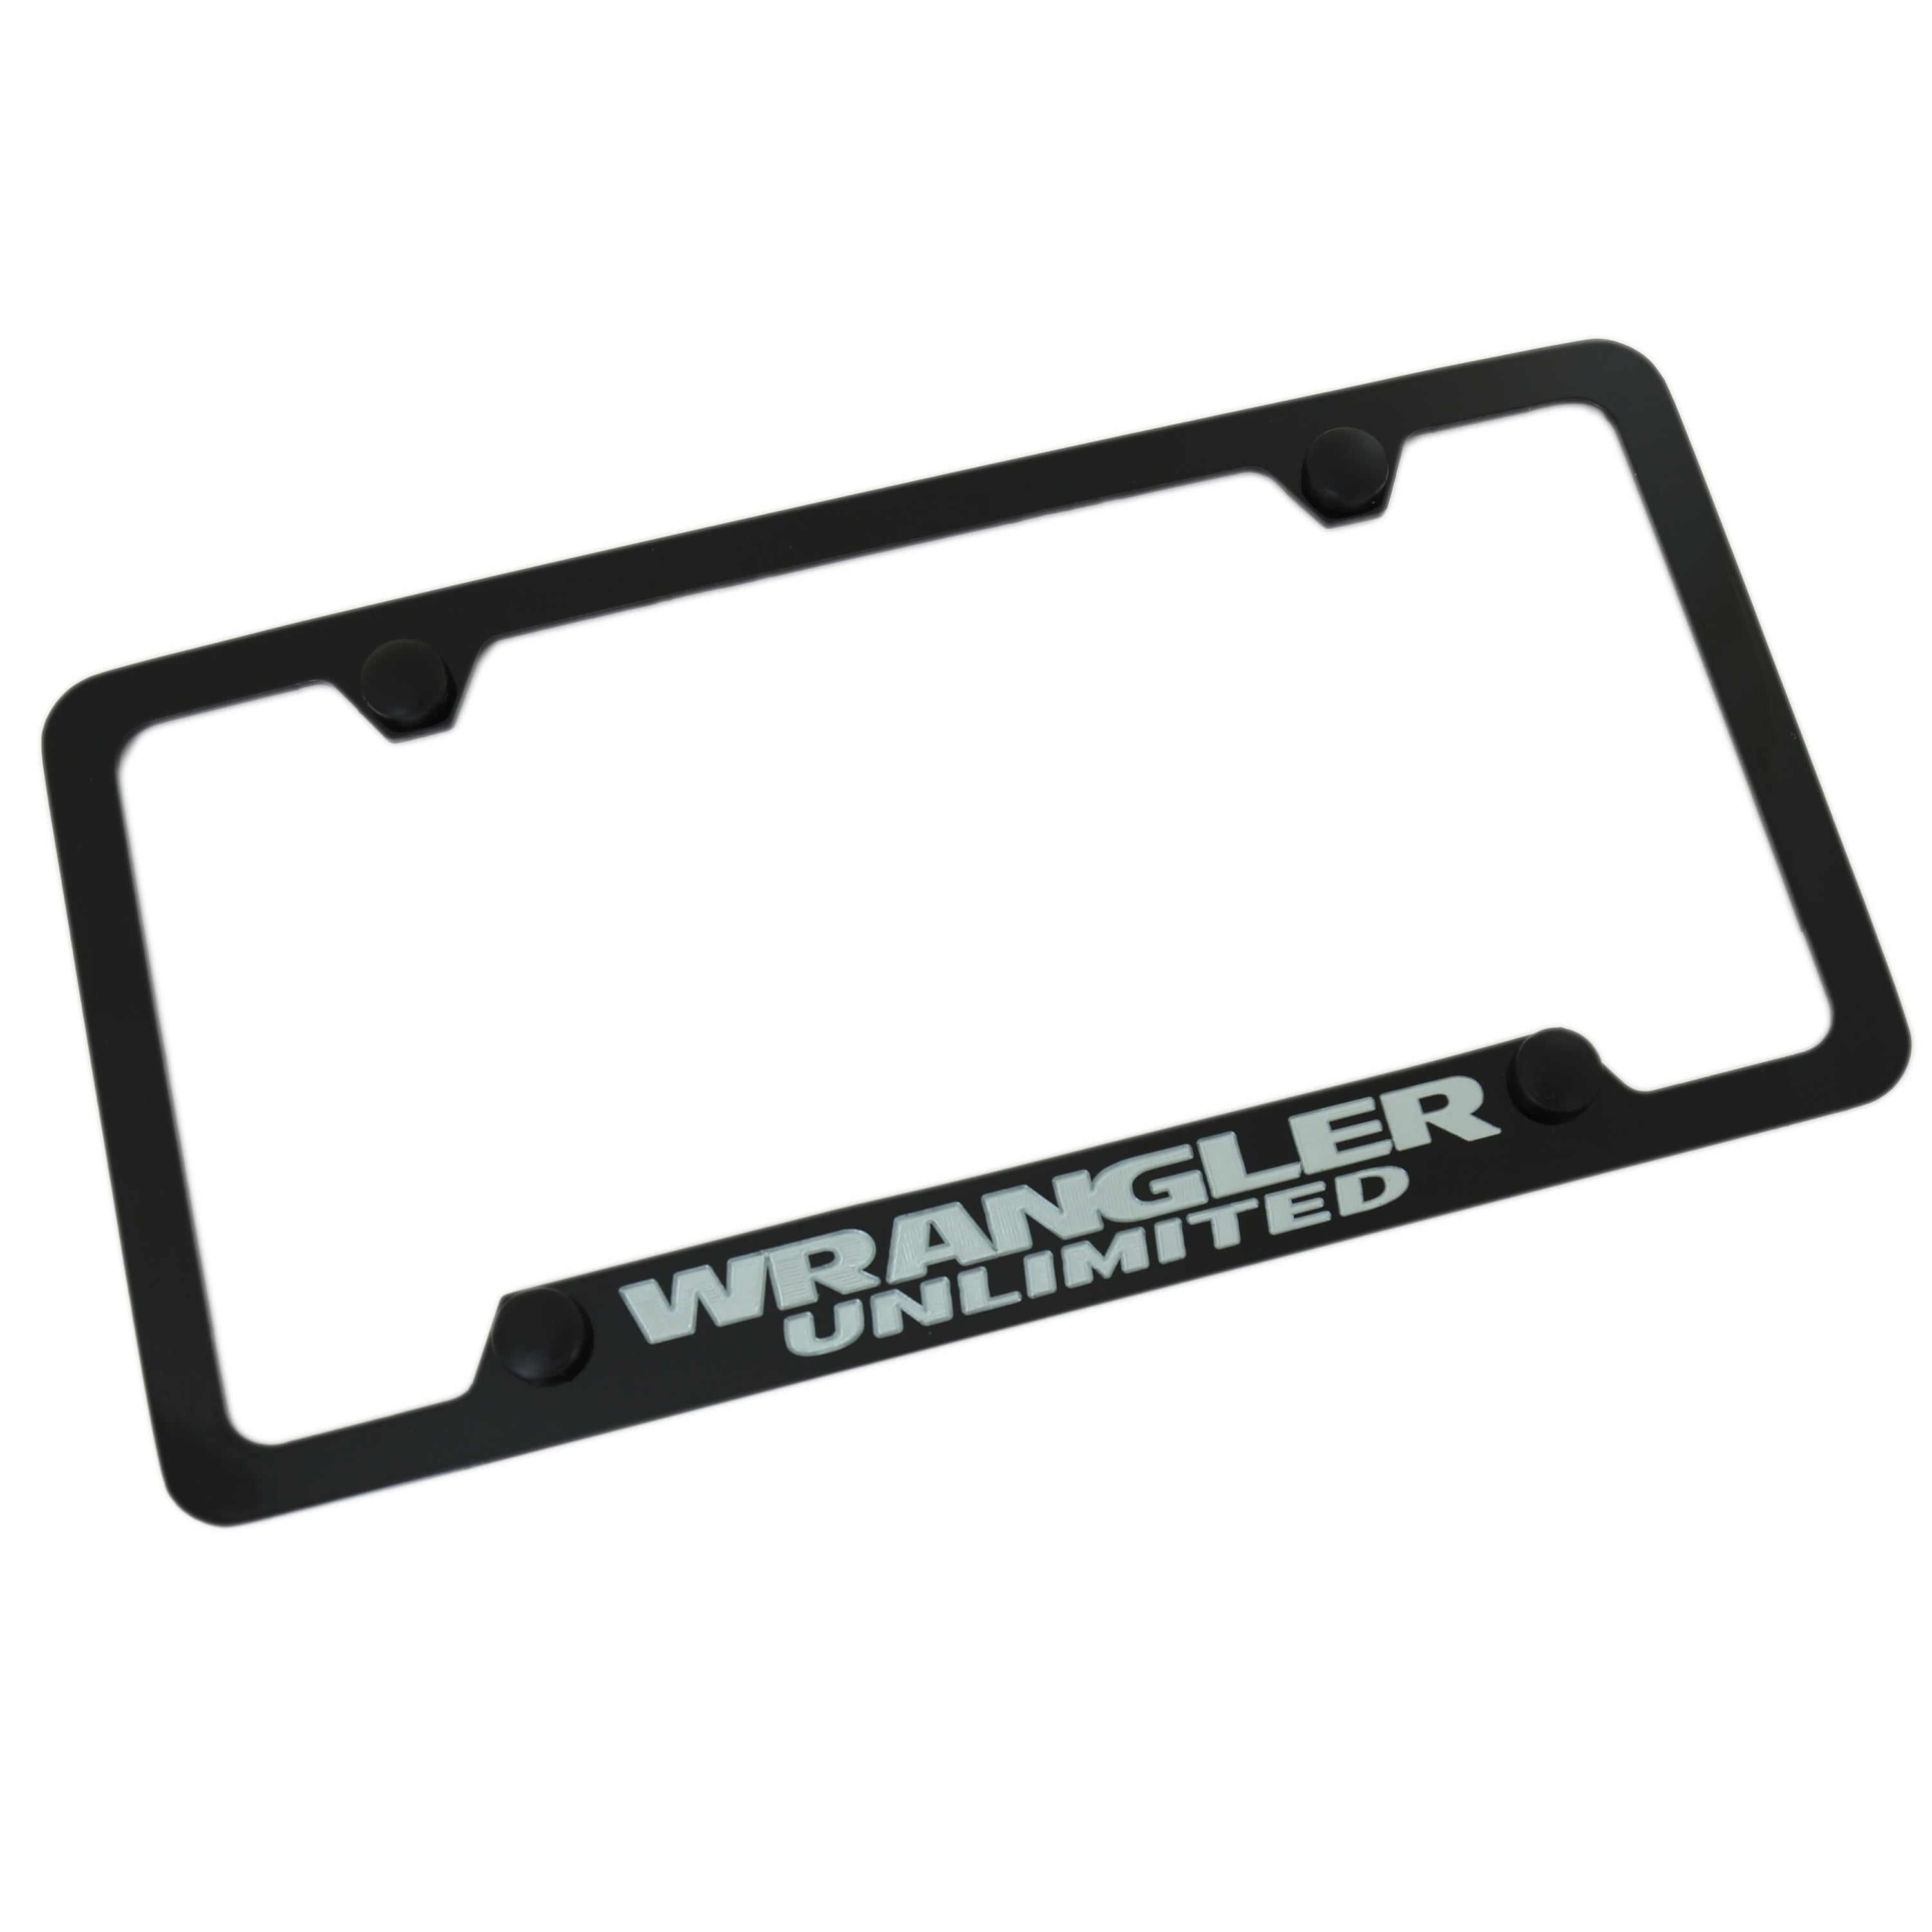 Jeep Wrangler Unlimited License Plate Frame With 4 Hole (Black) - Custom Werks